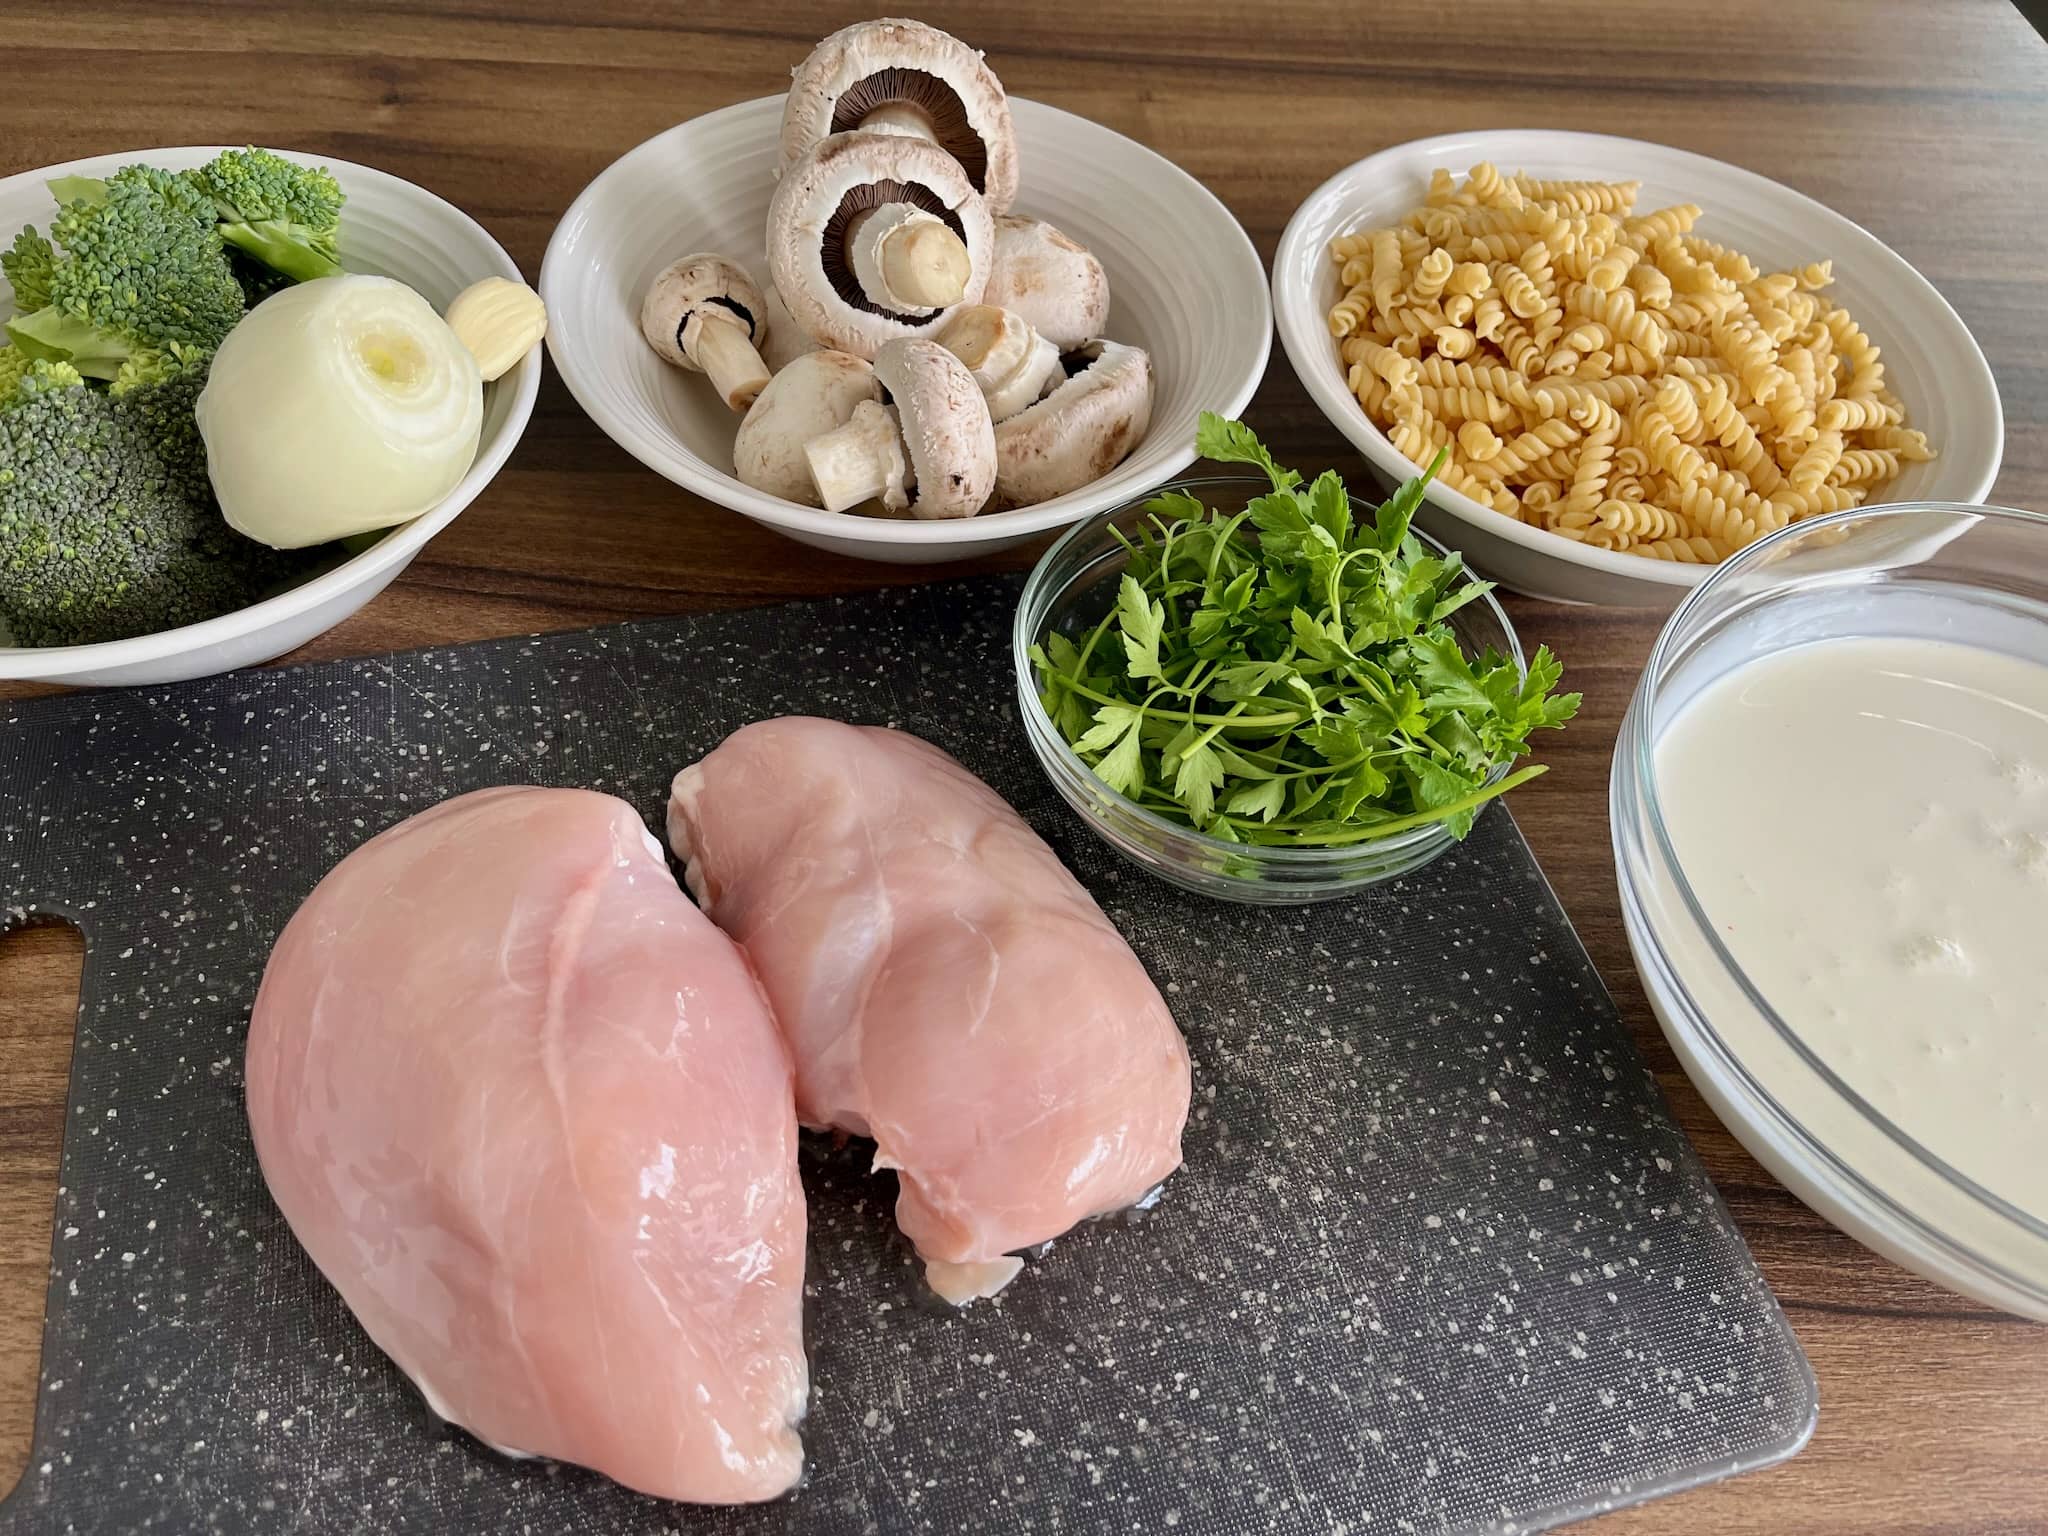 Ingredients for your Creamy chicken pasta with broccoli and mushrooms